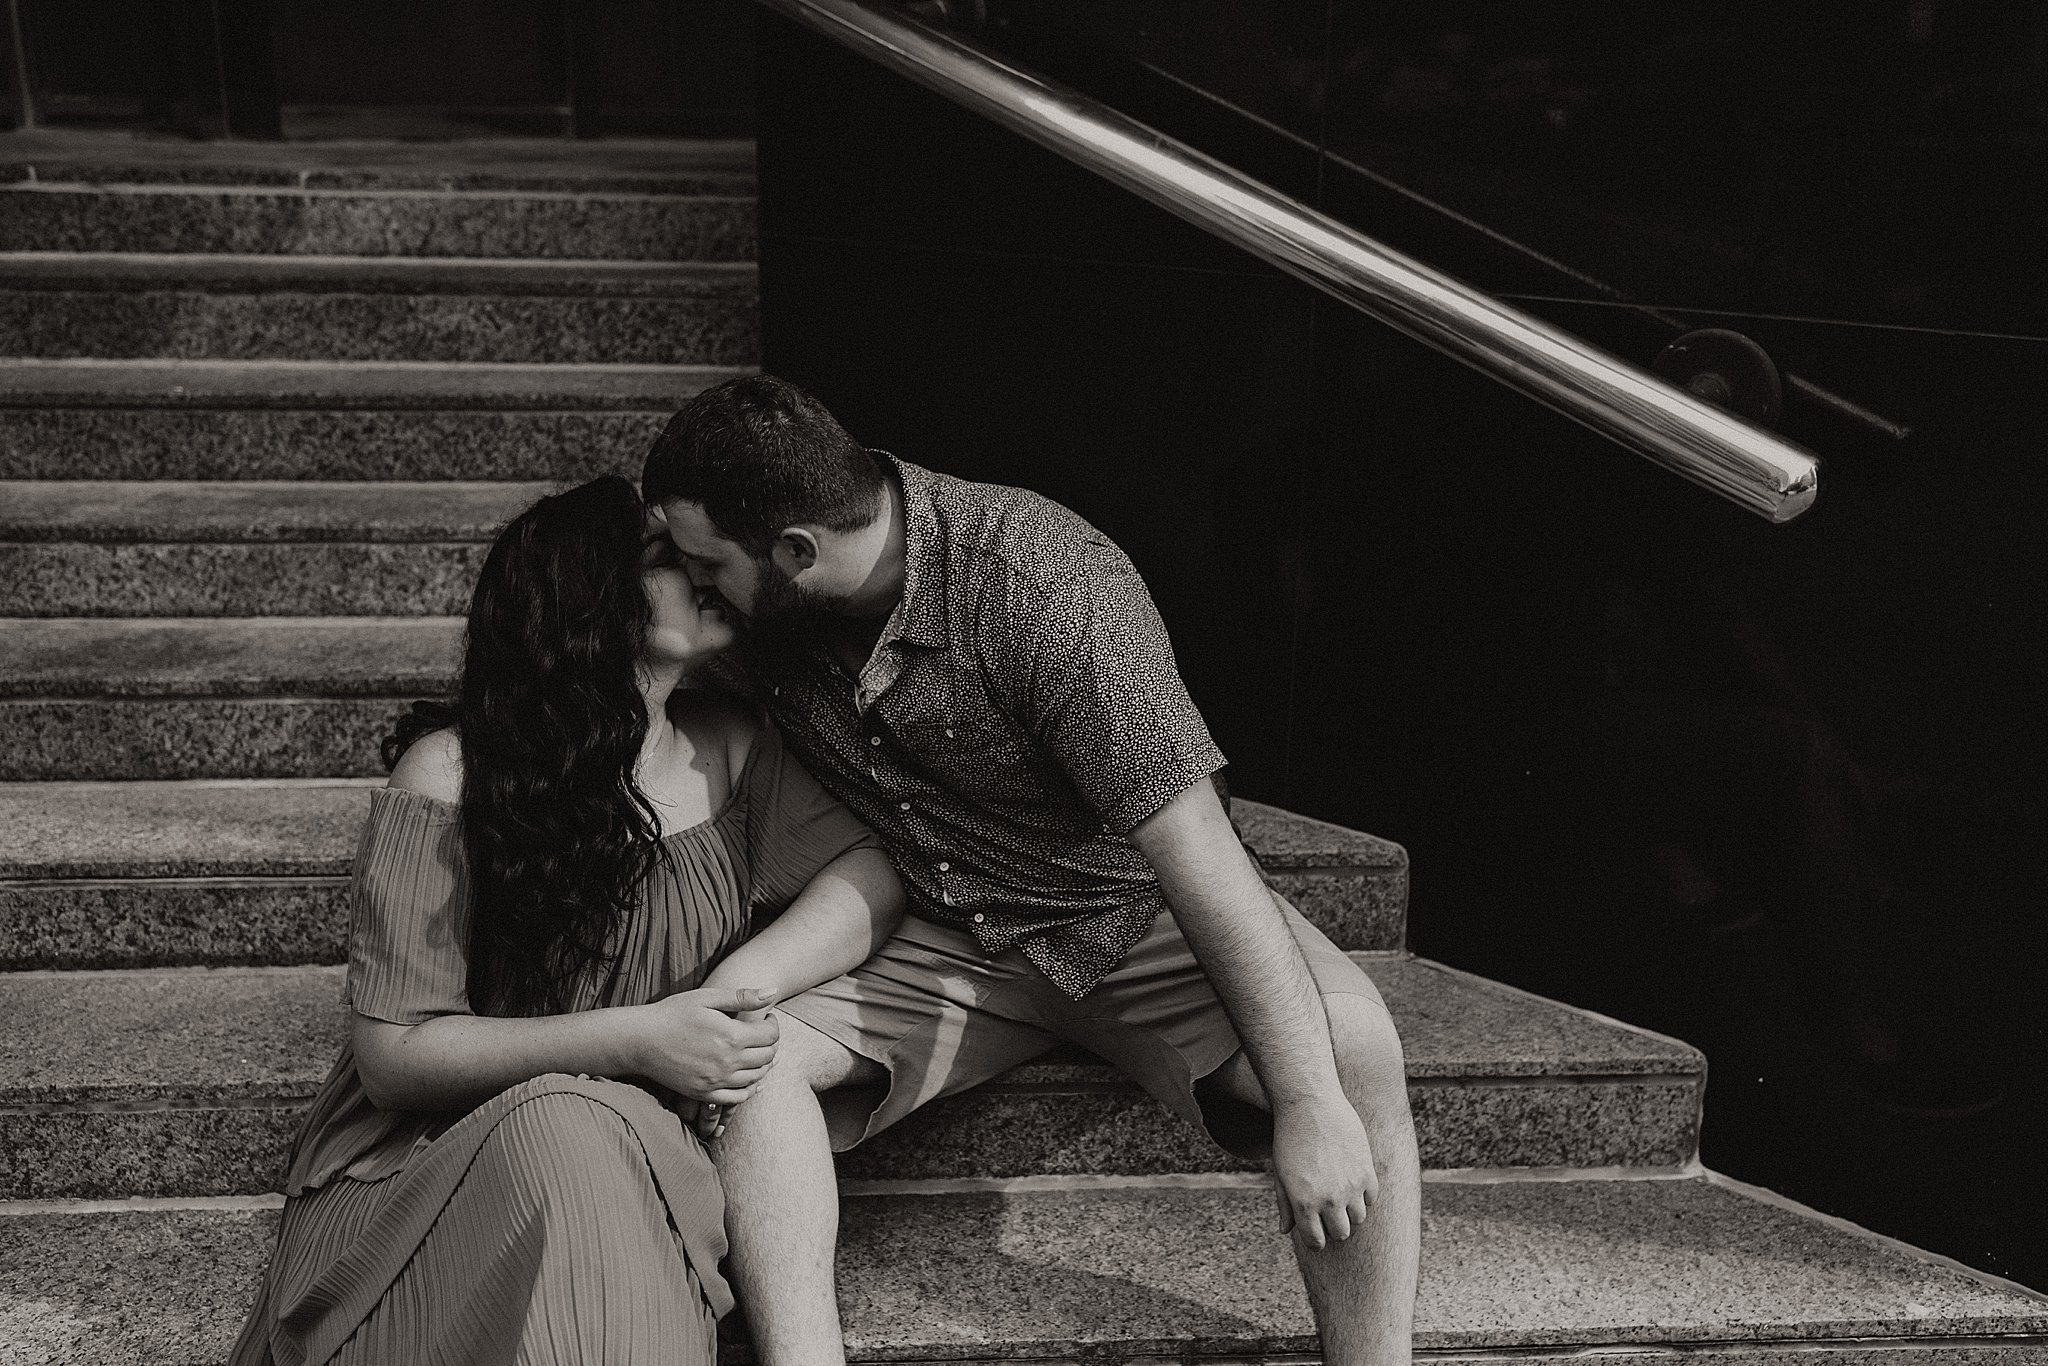 Downtown St. Louis Engagement Pictures